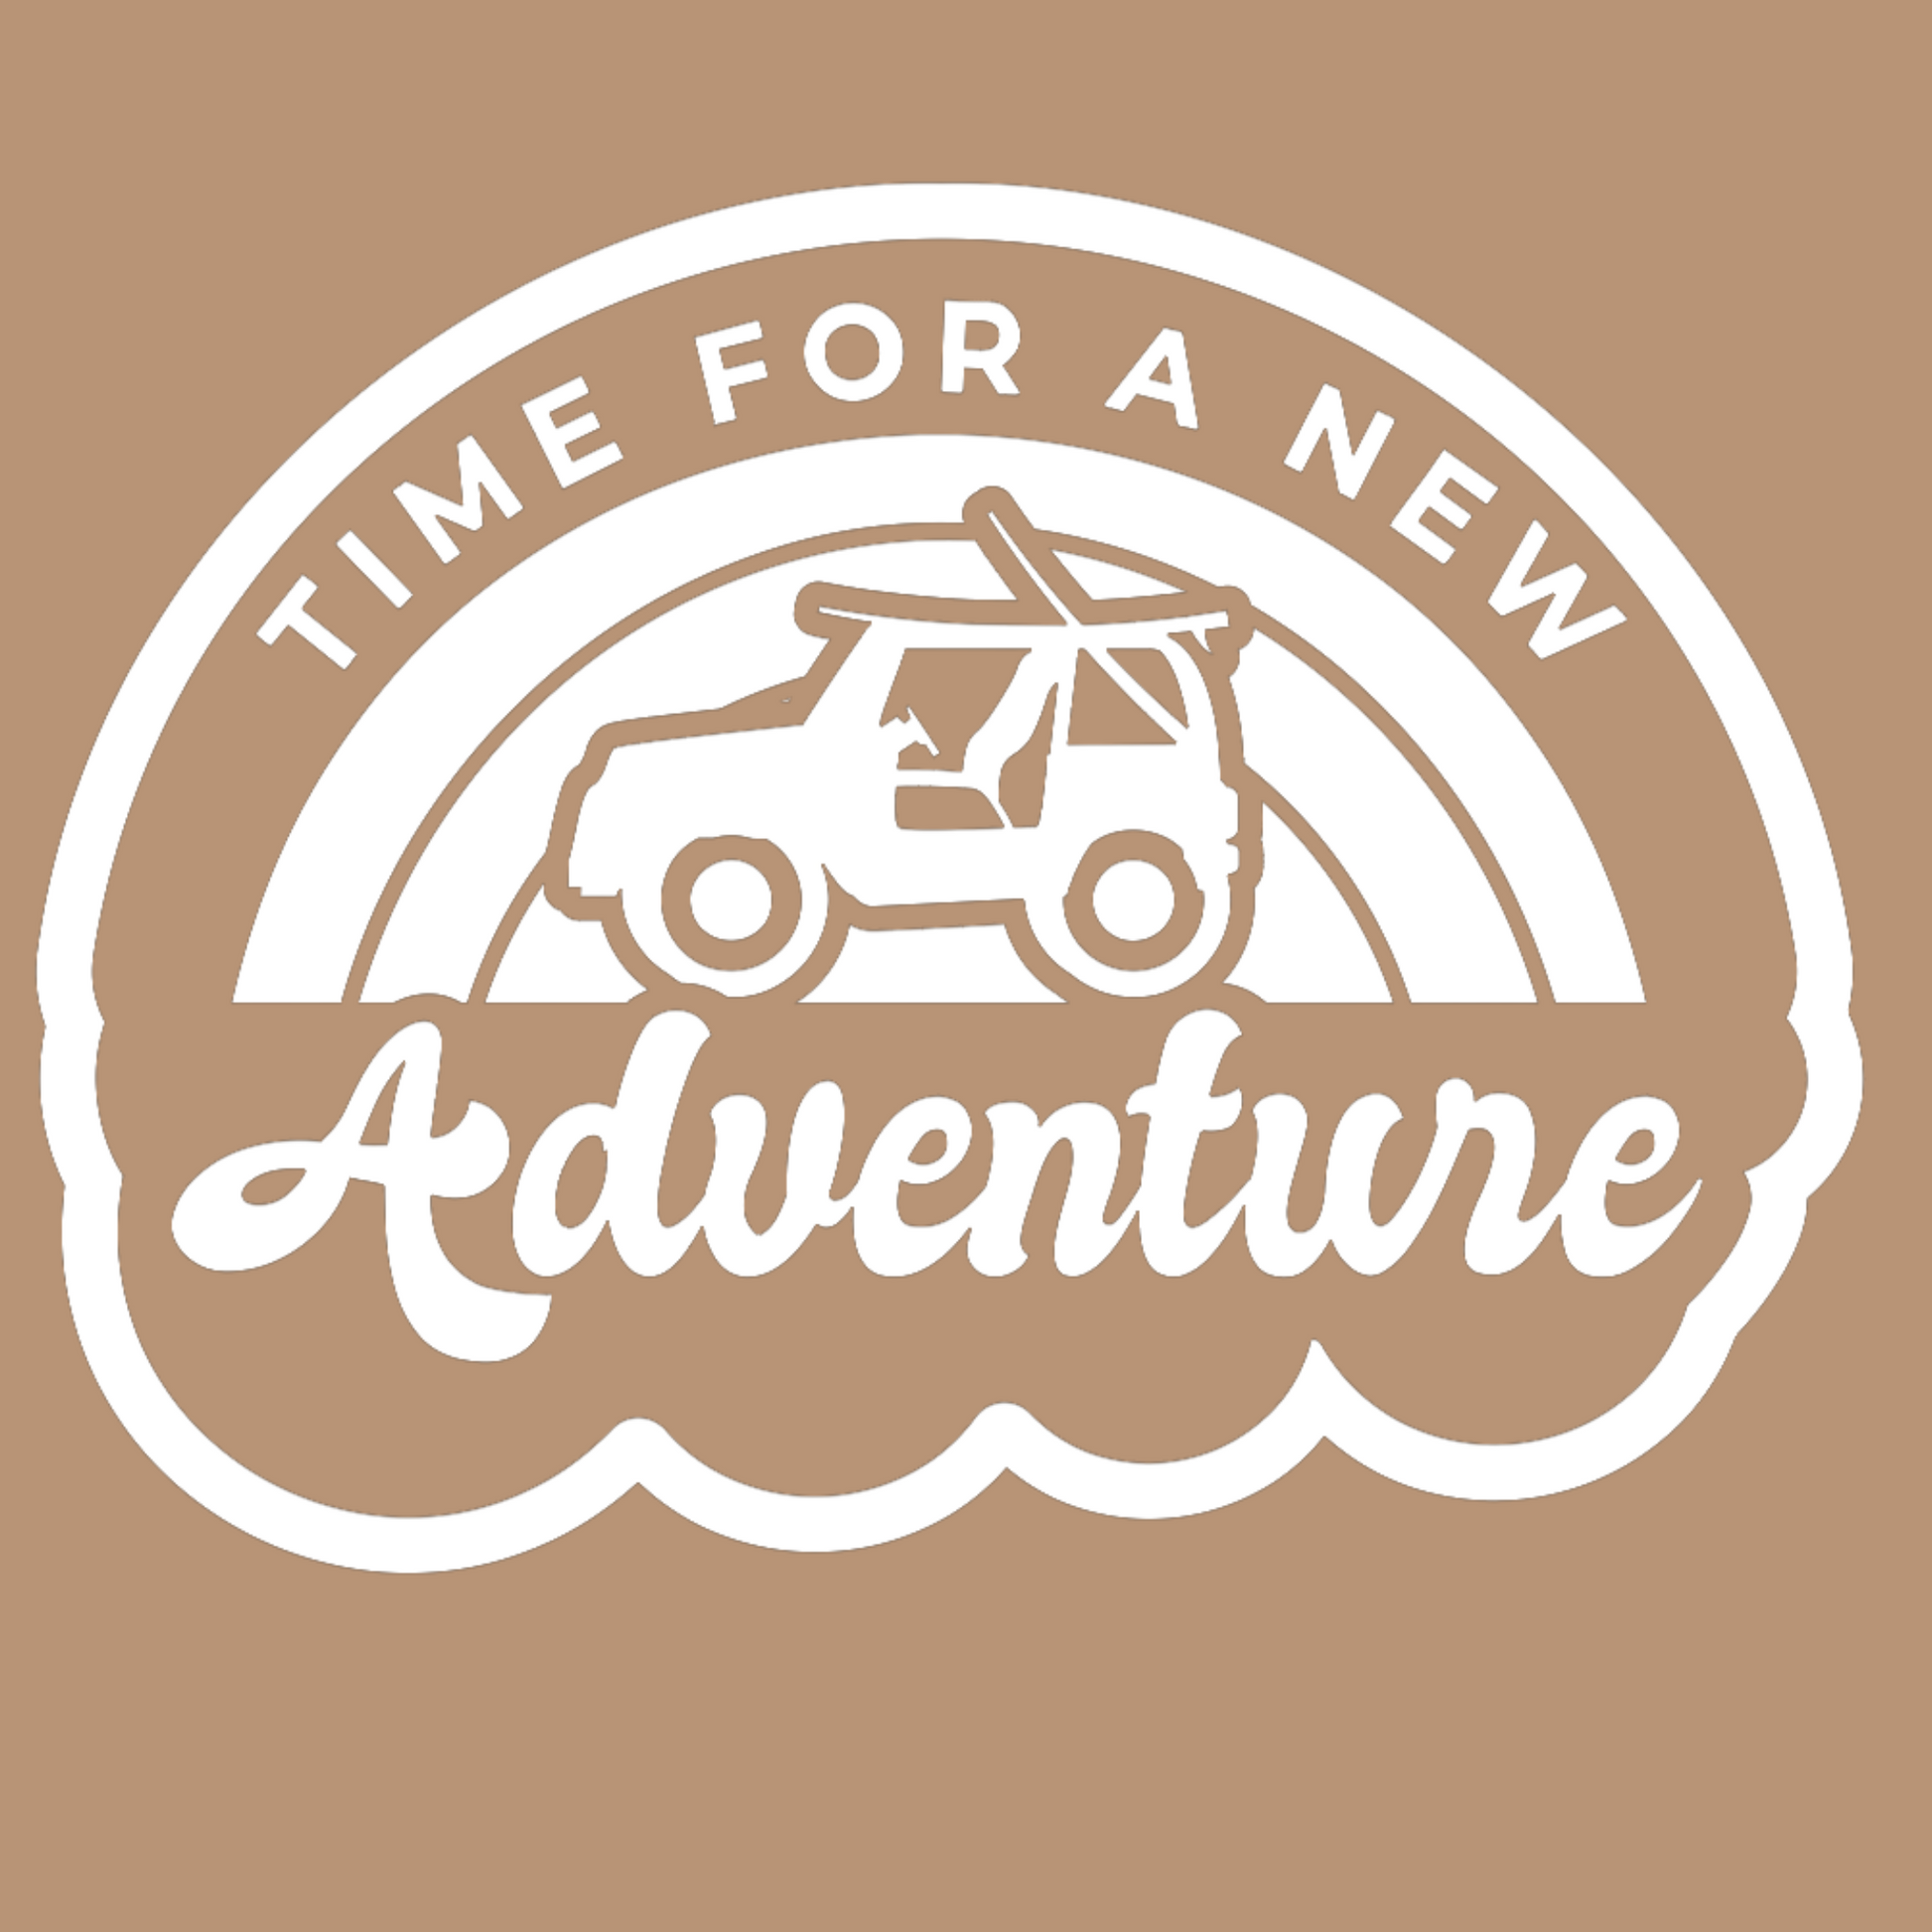 Time For A New Adventure Hooded Sweatshirt. Design is in a cloud bubble with time for a new adventure at the top curved with an off road vehicle in the middle with a rainbow behind it, and adventure below it. This the design in a white on the sandstone tan hoodie. This is an image of the design on the sandstone tan background.